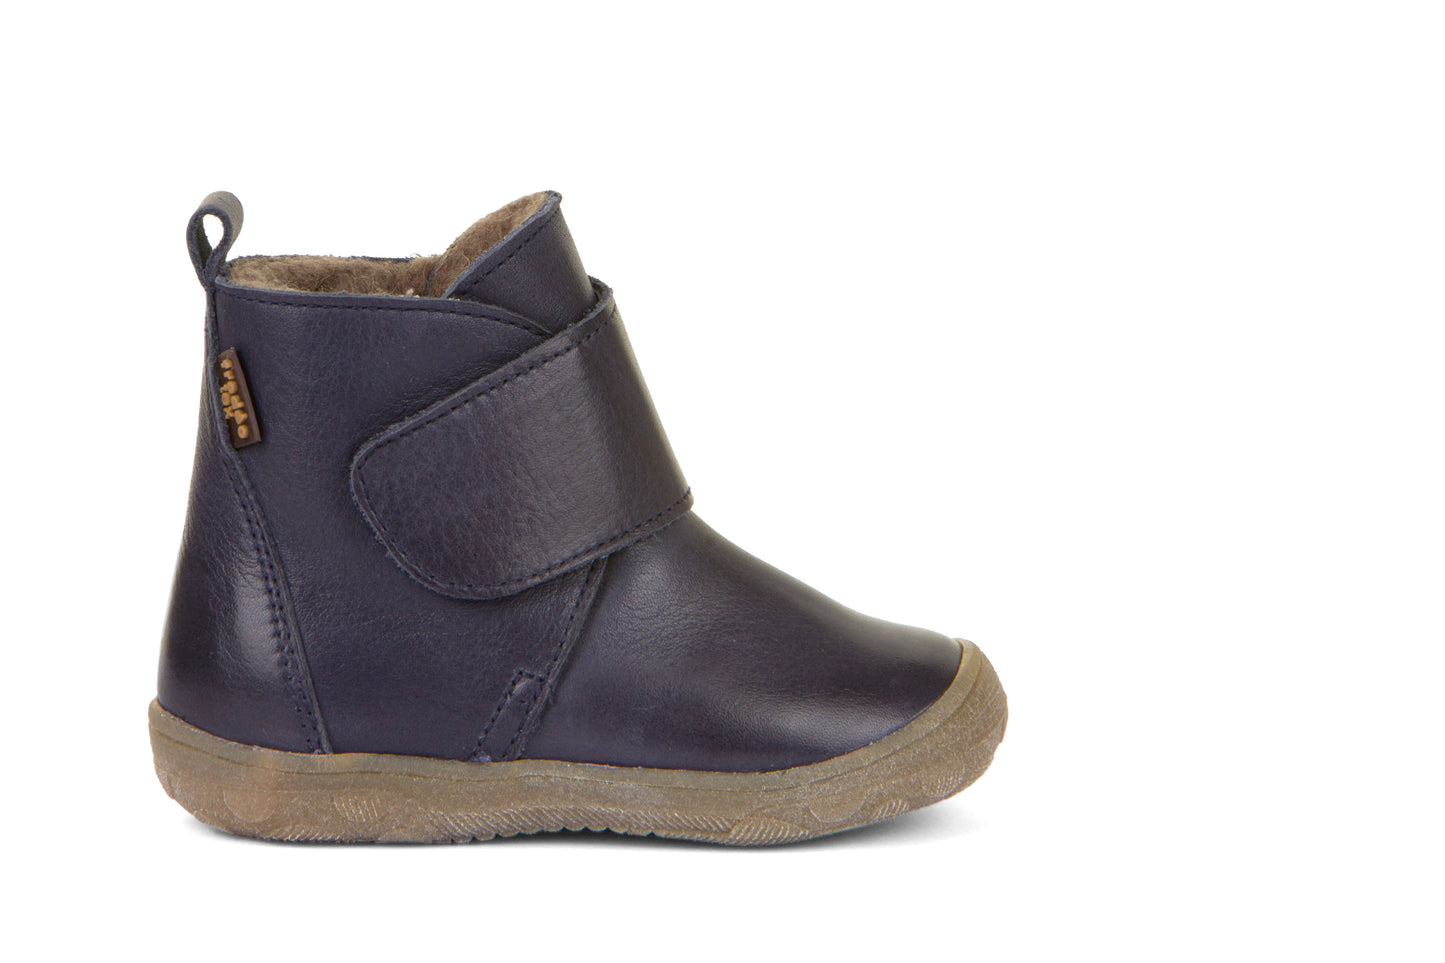 A unisex waterproof boot by Froddo, style Kart Tex Boot G2160071 in Navy. Right side view.